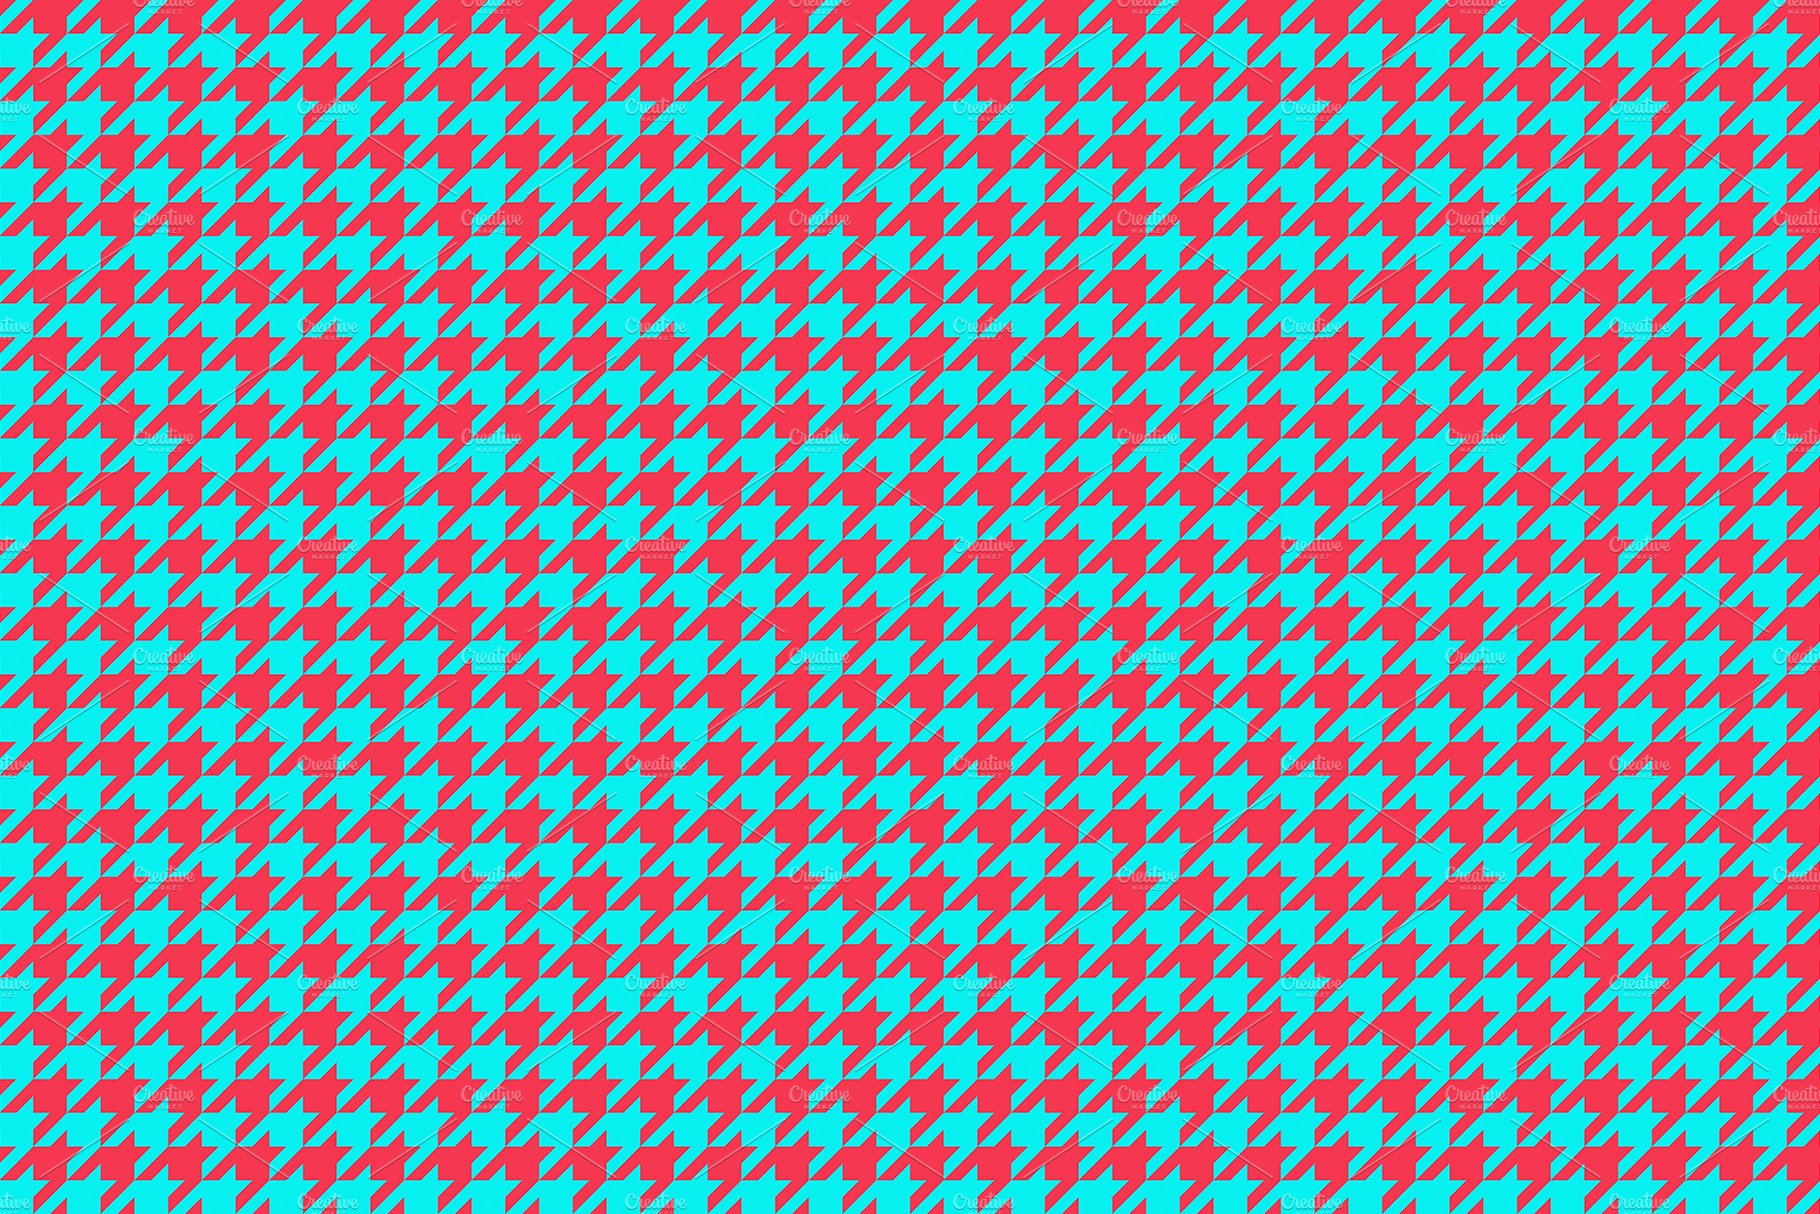 4 houndstooth pattern background texture copy 496